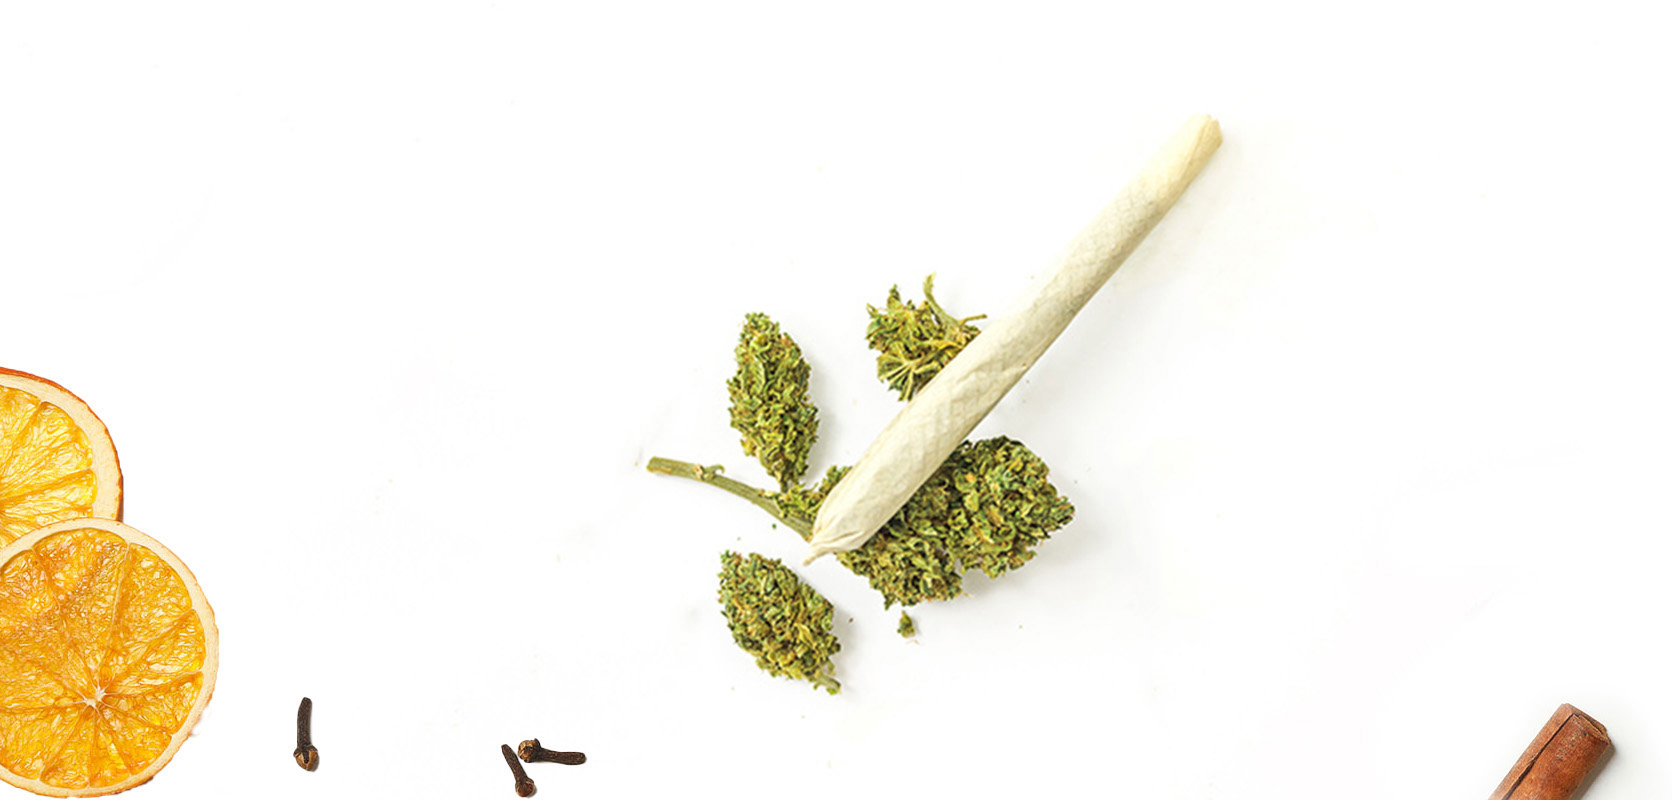 Space Queen weed buds and pre-rolled joint. budget buds. moon rock weed. weed delivery canada. indica strains. 